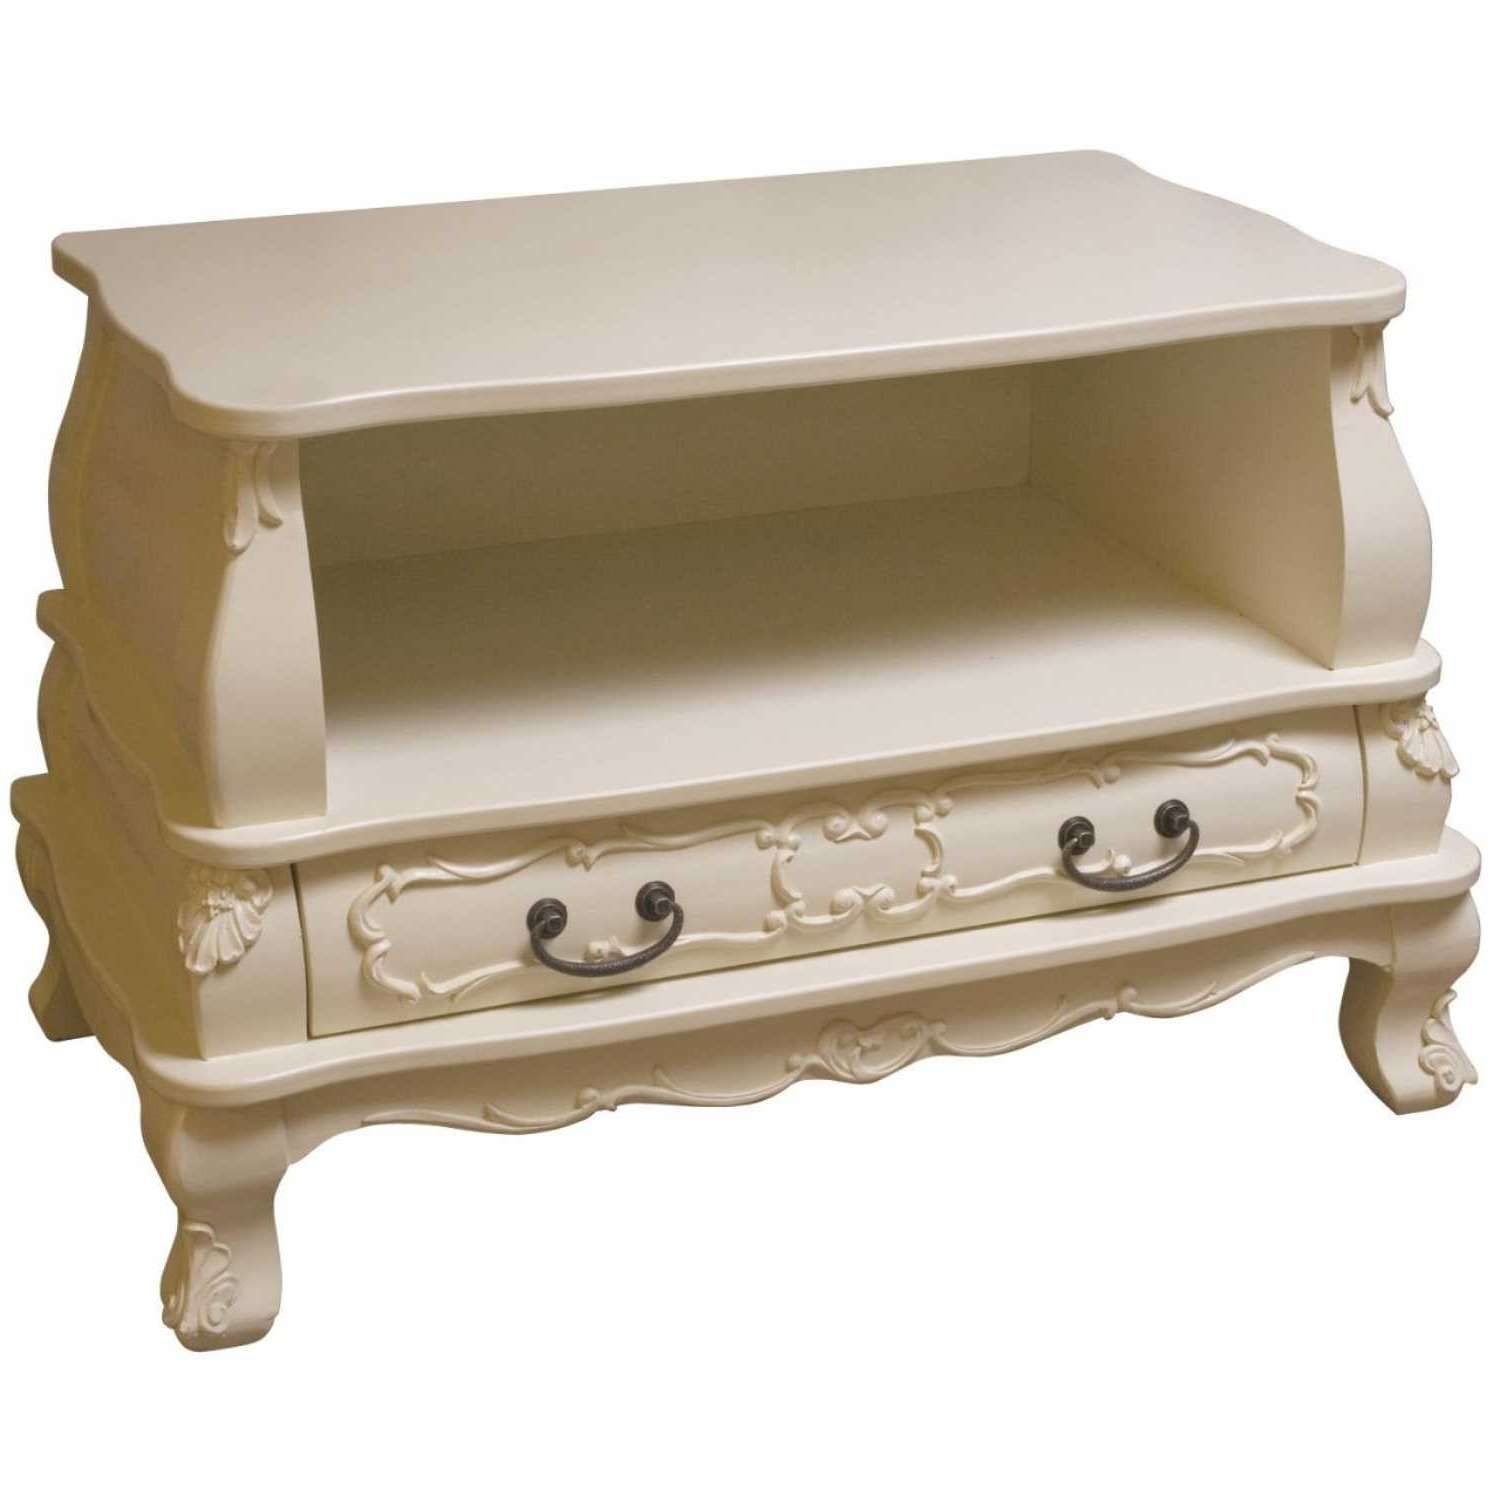 Shabby Chic Cream Painted Brittany Tv Cabinet In Shabby Chic Tv Cabinets (View 9 of 20)